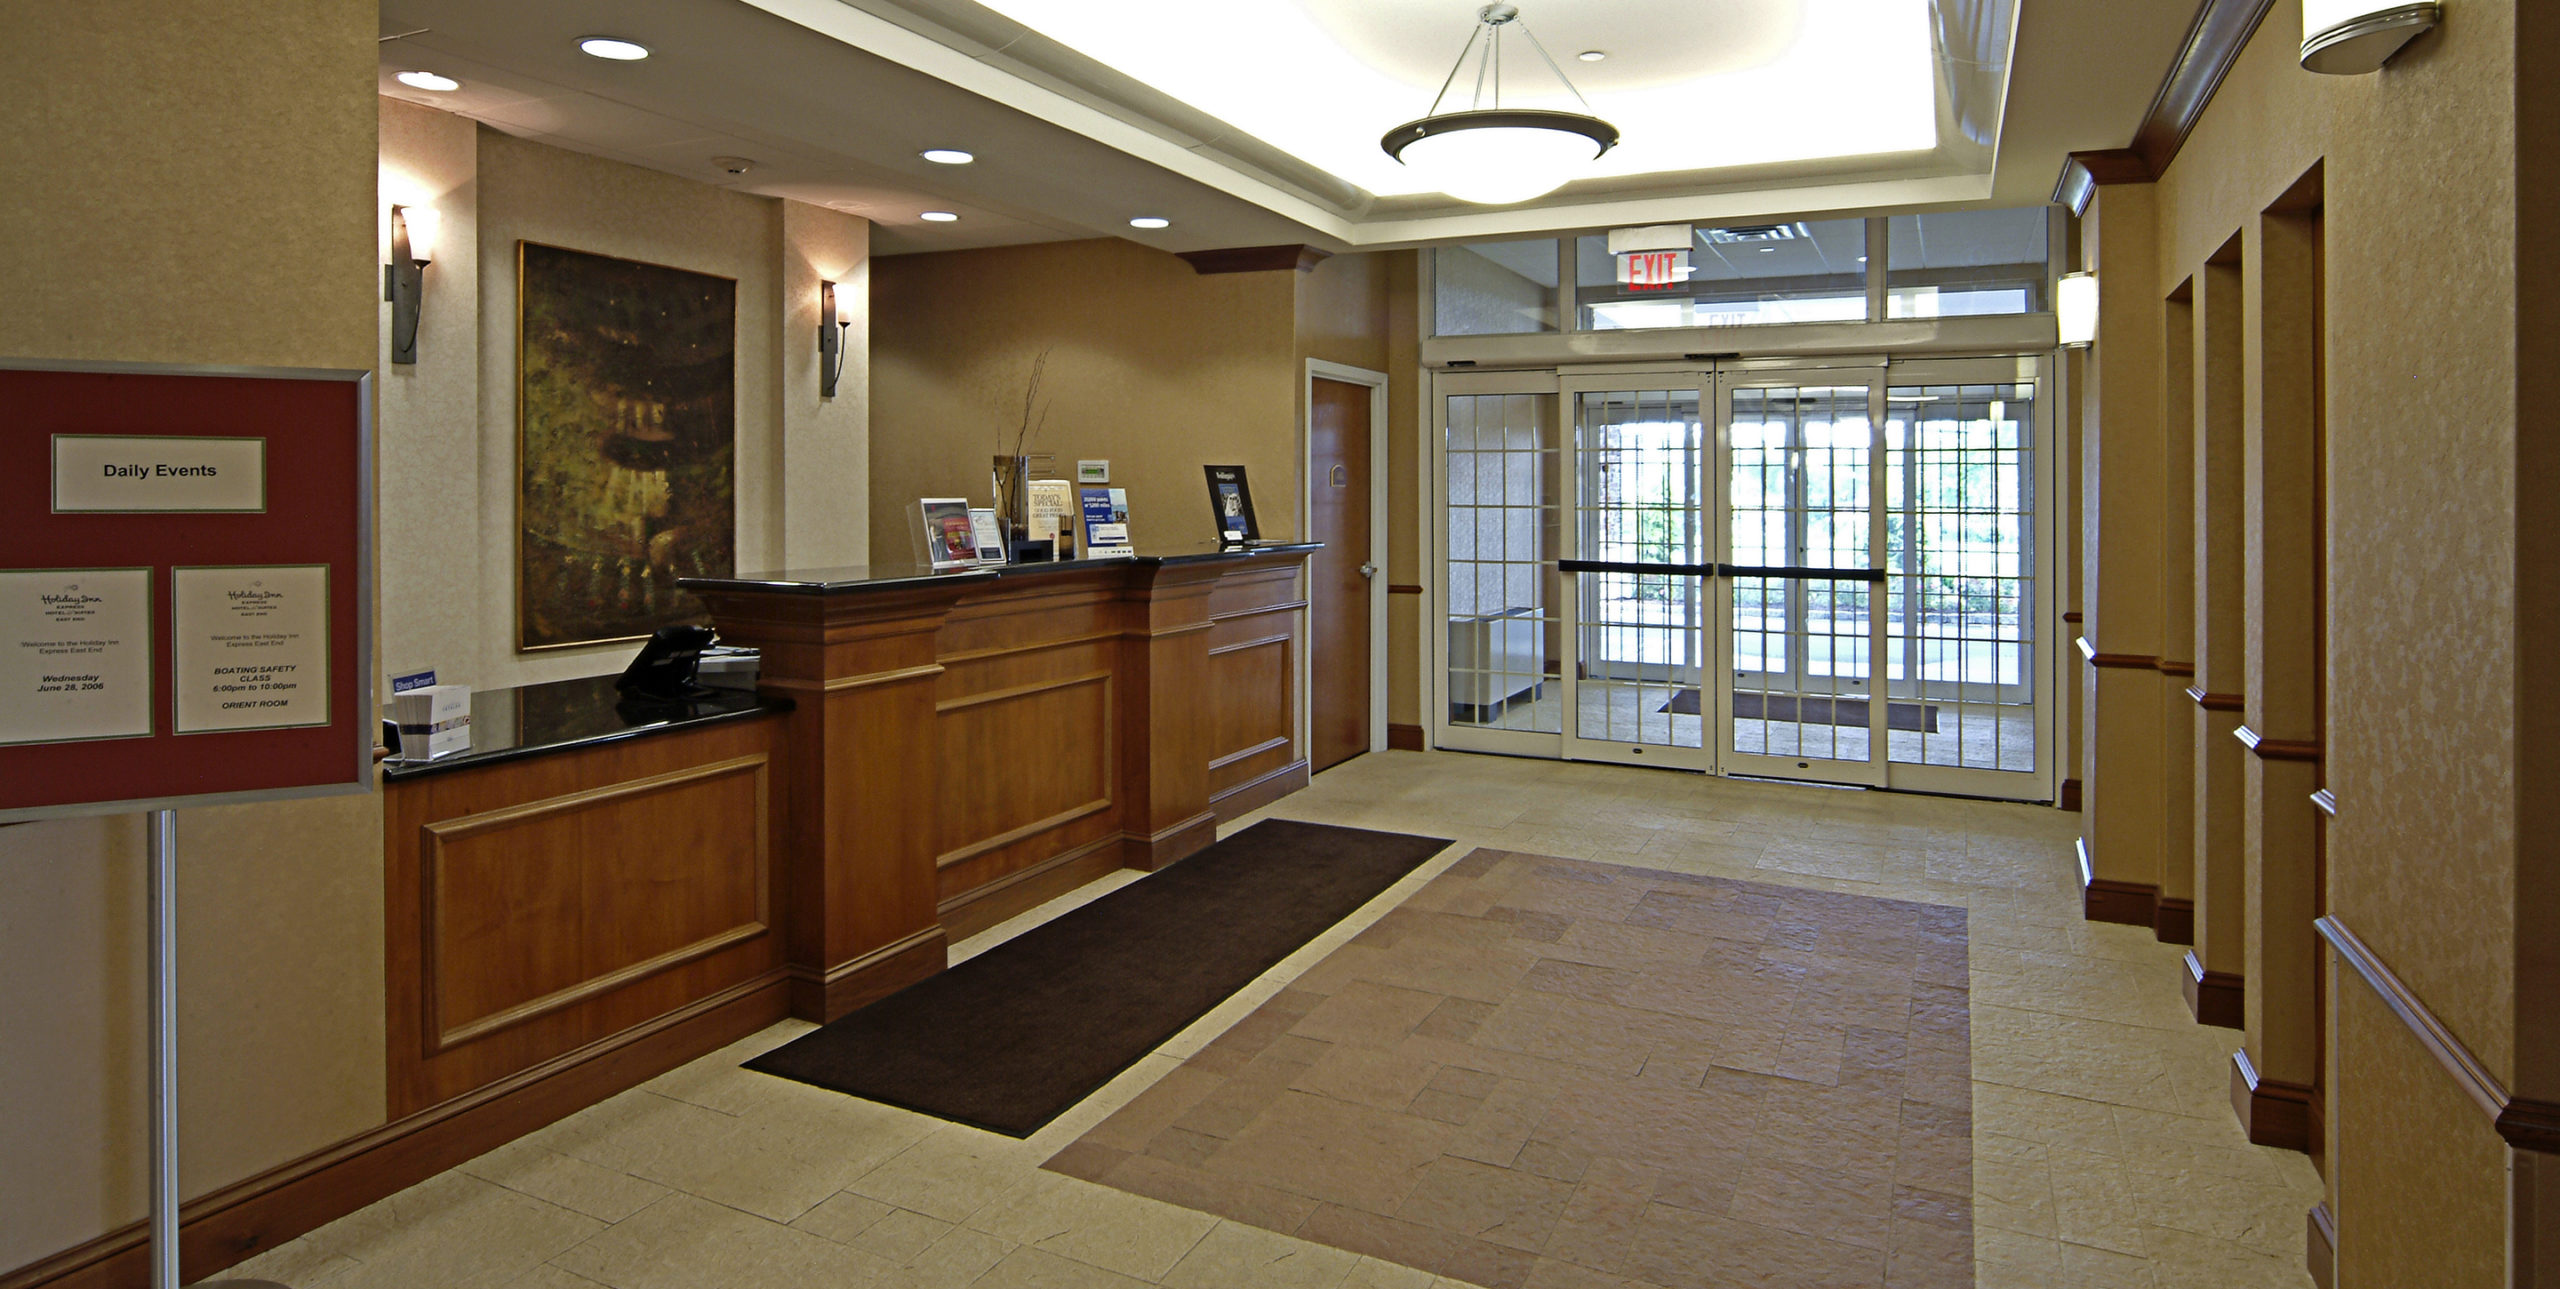 Front desk reception at Holiday Inn Express at 1707 Old Country Road, Riverhead